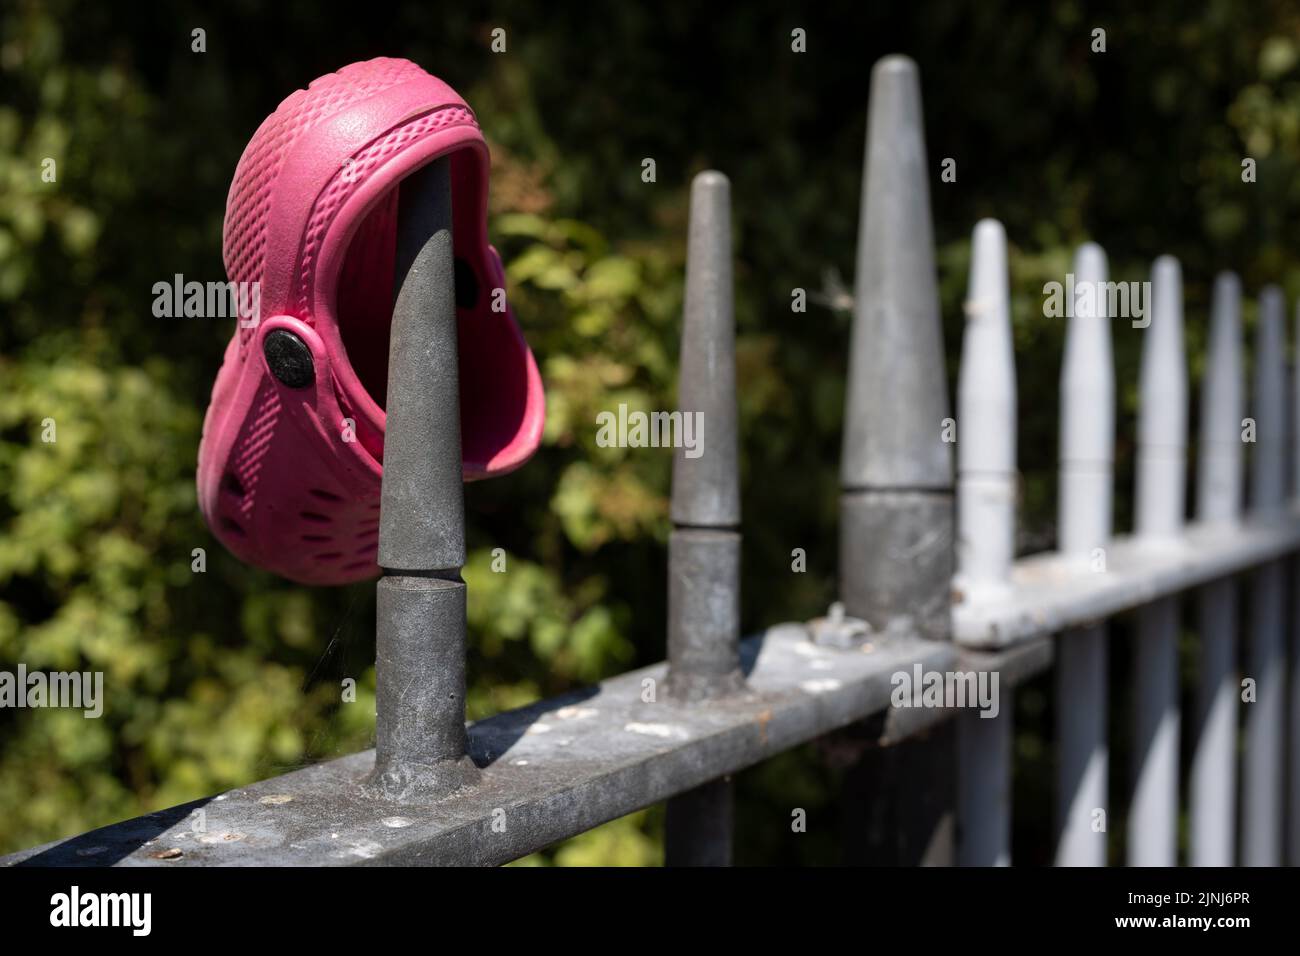 A single child's pink Croc shoe rests on some railings outside Ruskin Park, on 10th August 2022, in London, England. Stock Photo